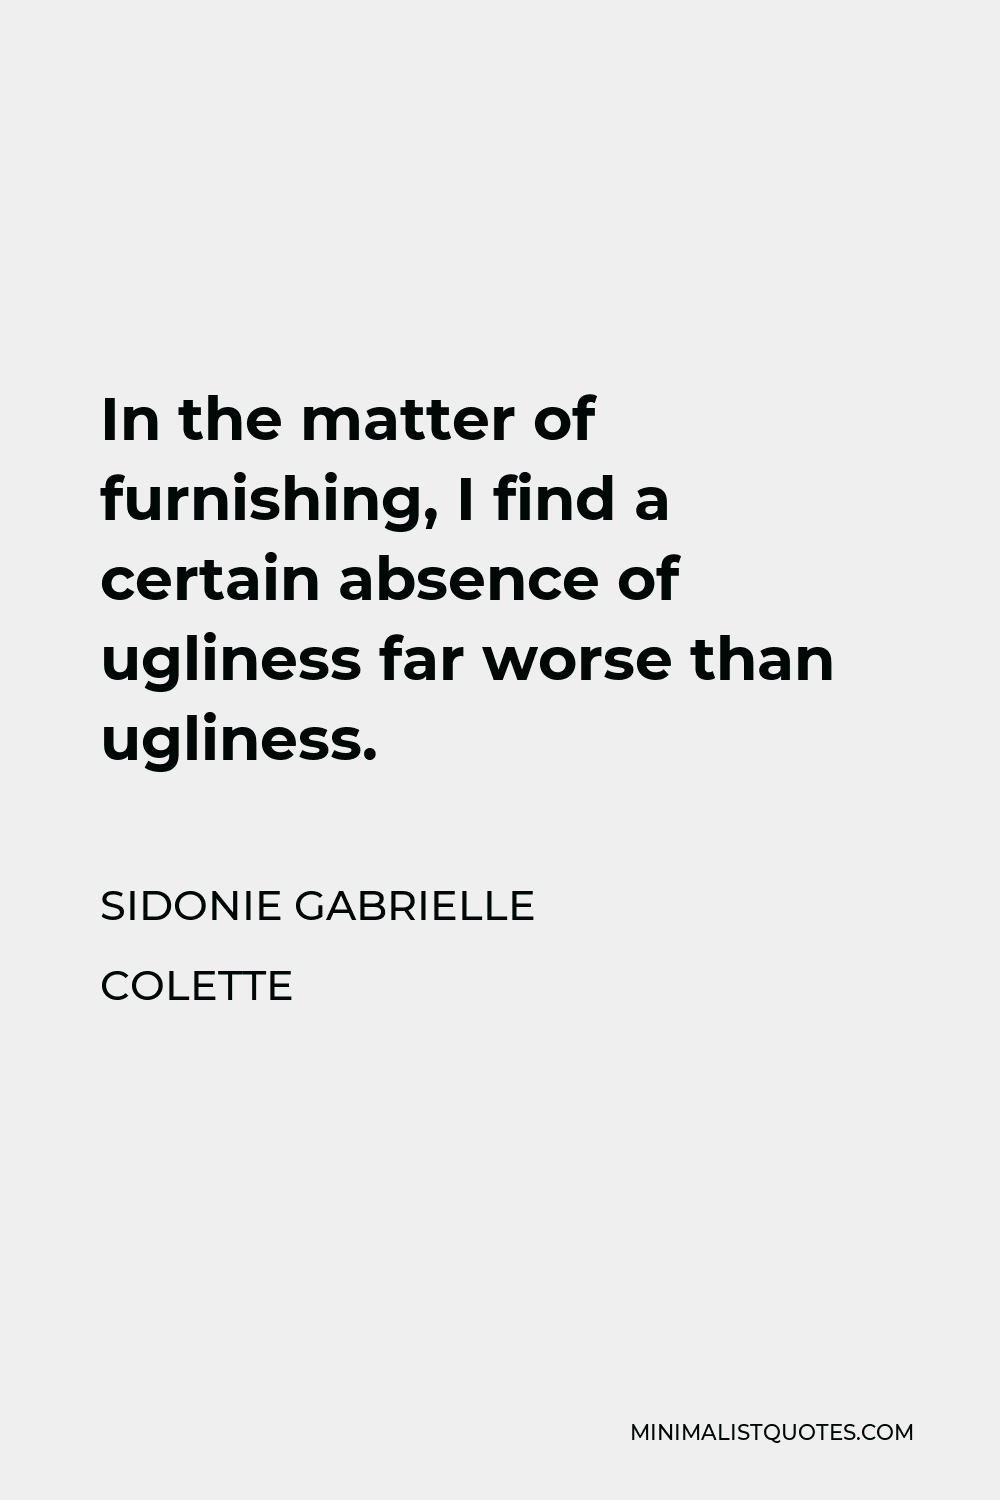 Sidonie Gabrielle Colette Quote - In the matter of furnishing, I find a certain absence of ugliness far worse than ugliness.